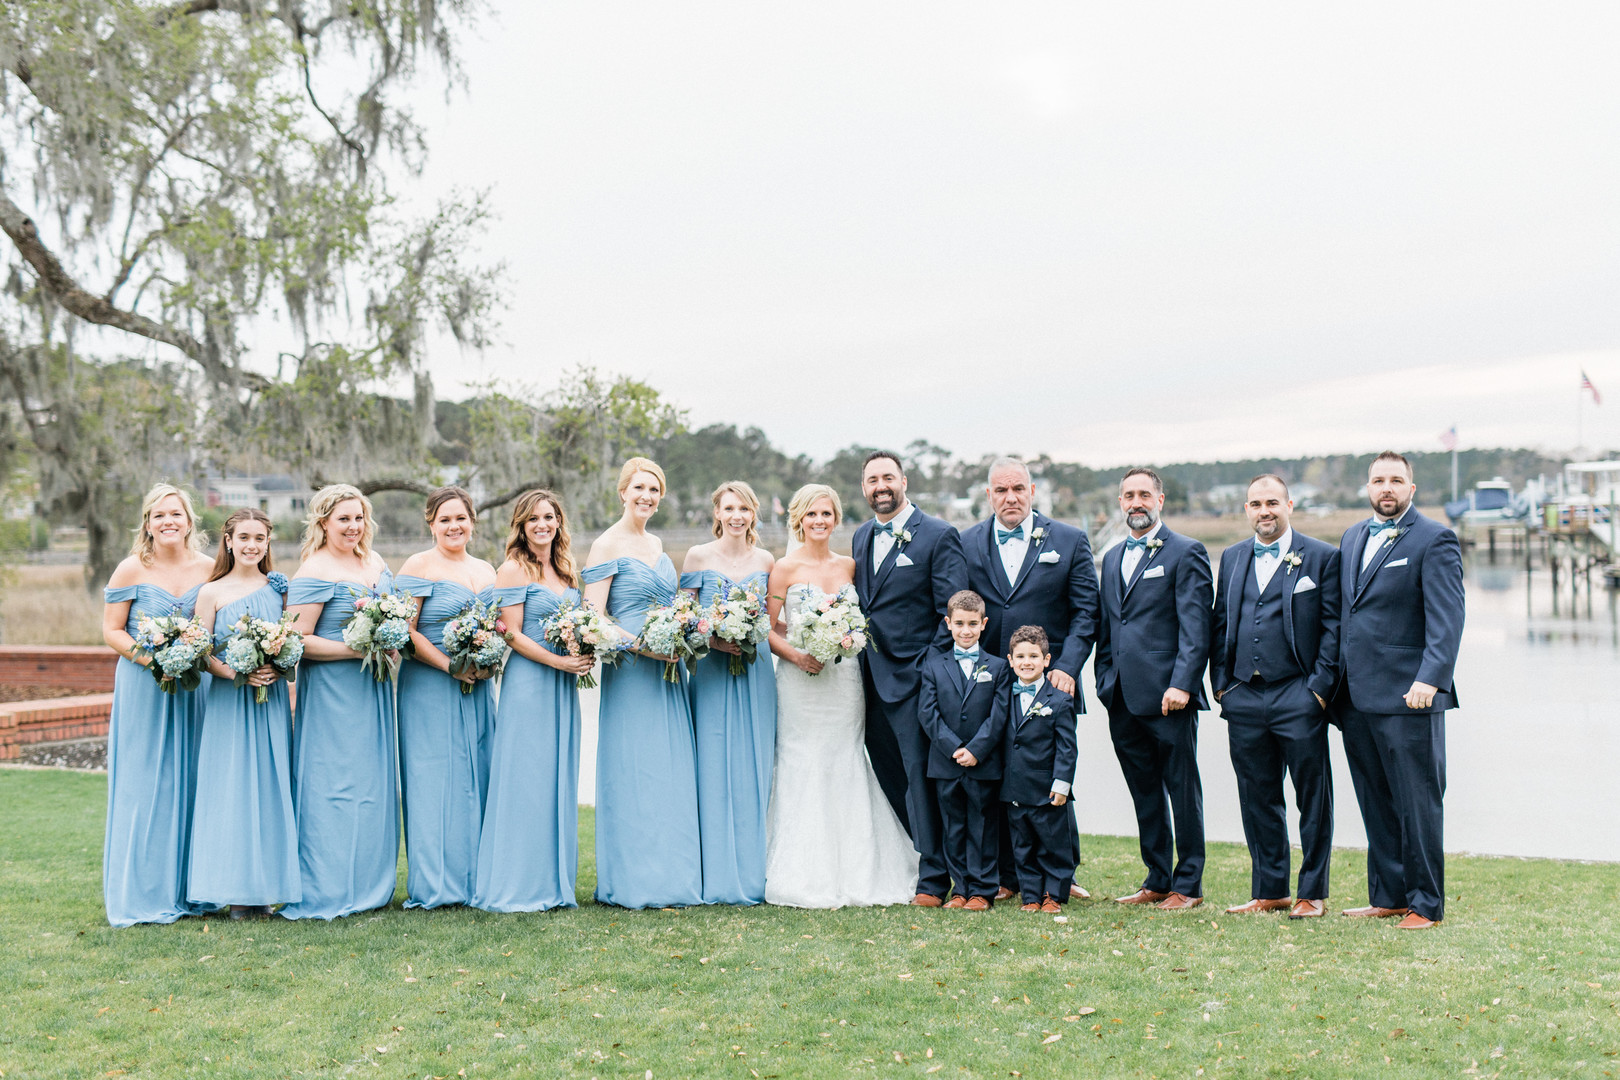 Sheorn_Snijders_CatherineAnnPhotography_catherineannphotographywedding31018carolineeric305_big.jpg